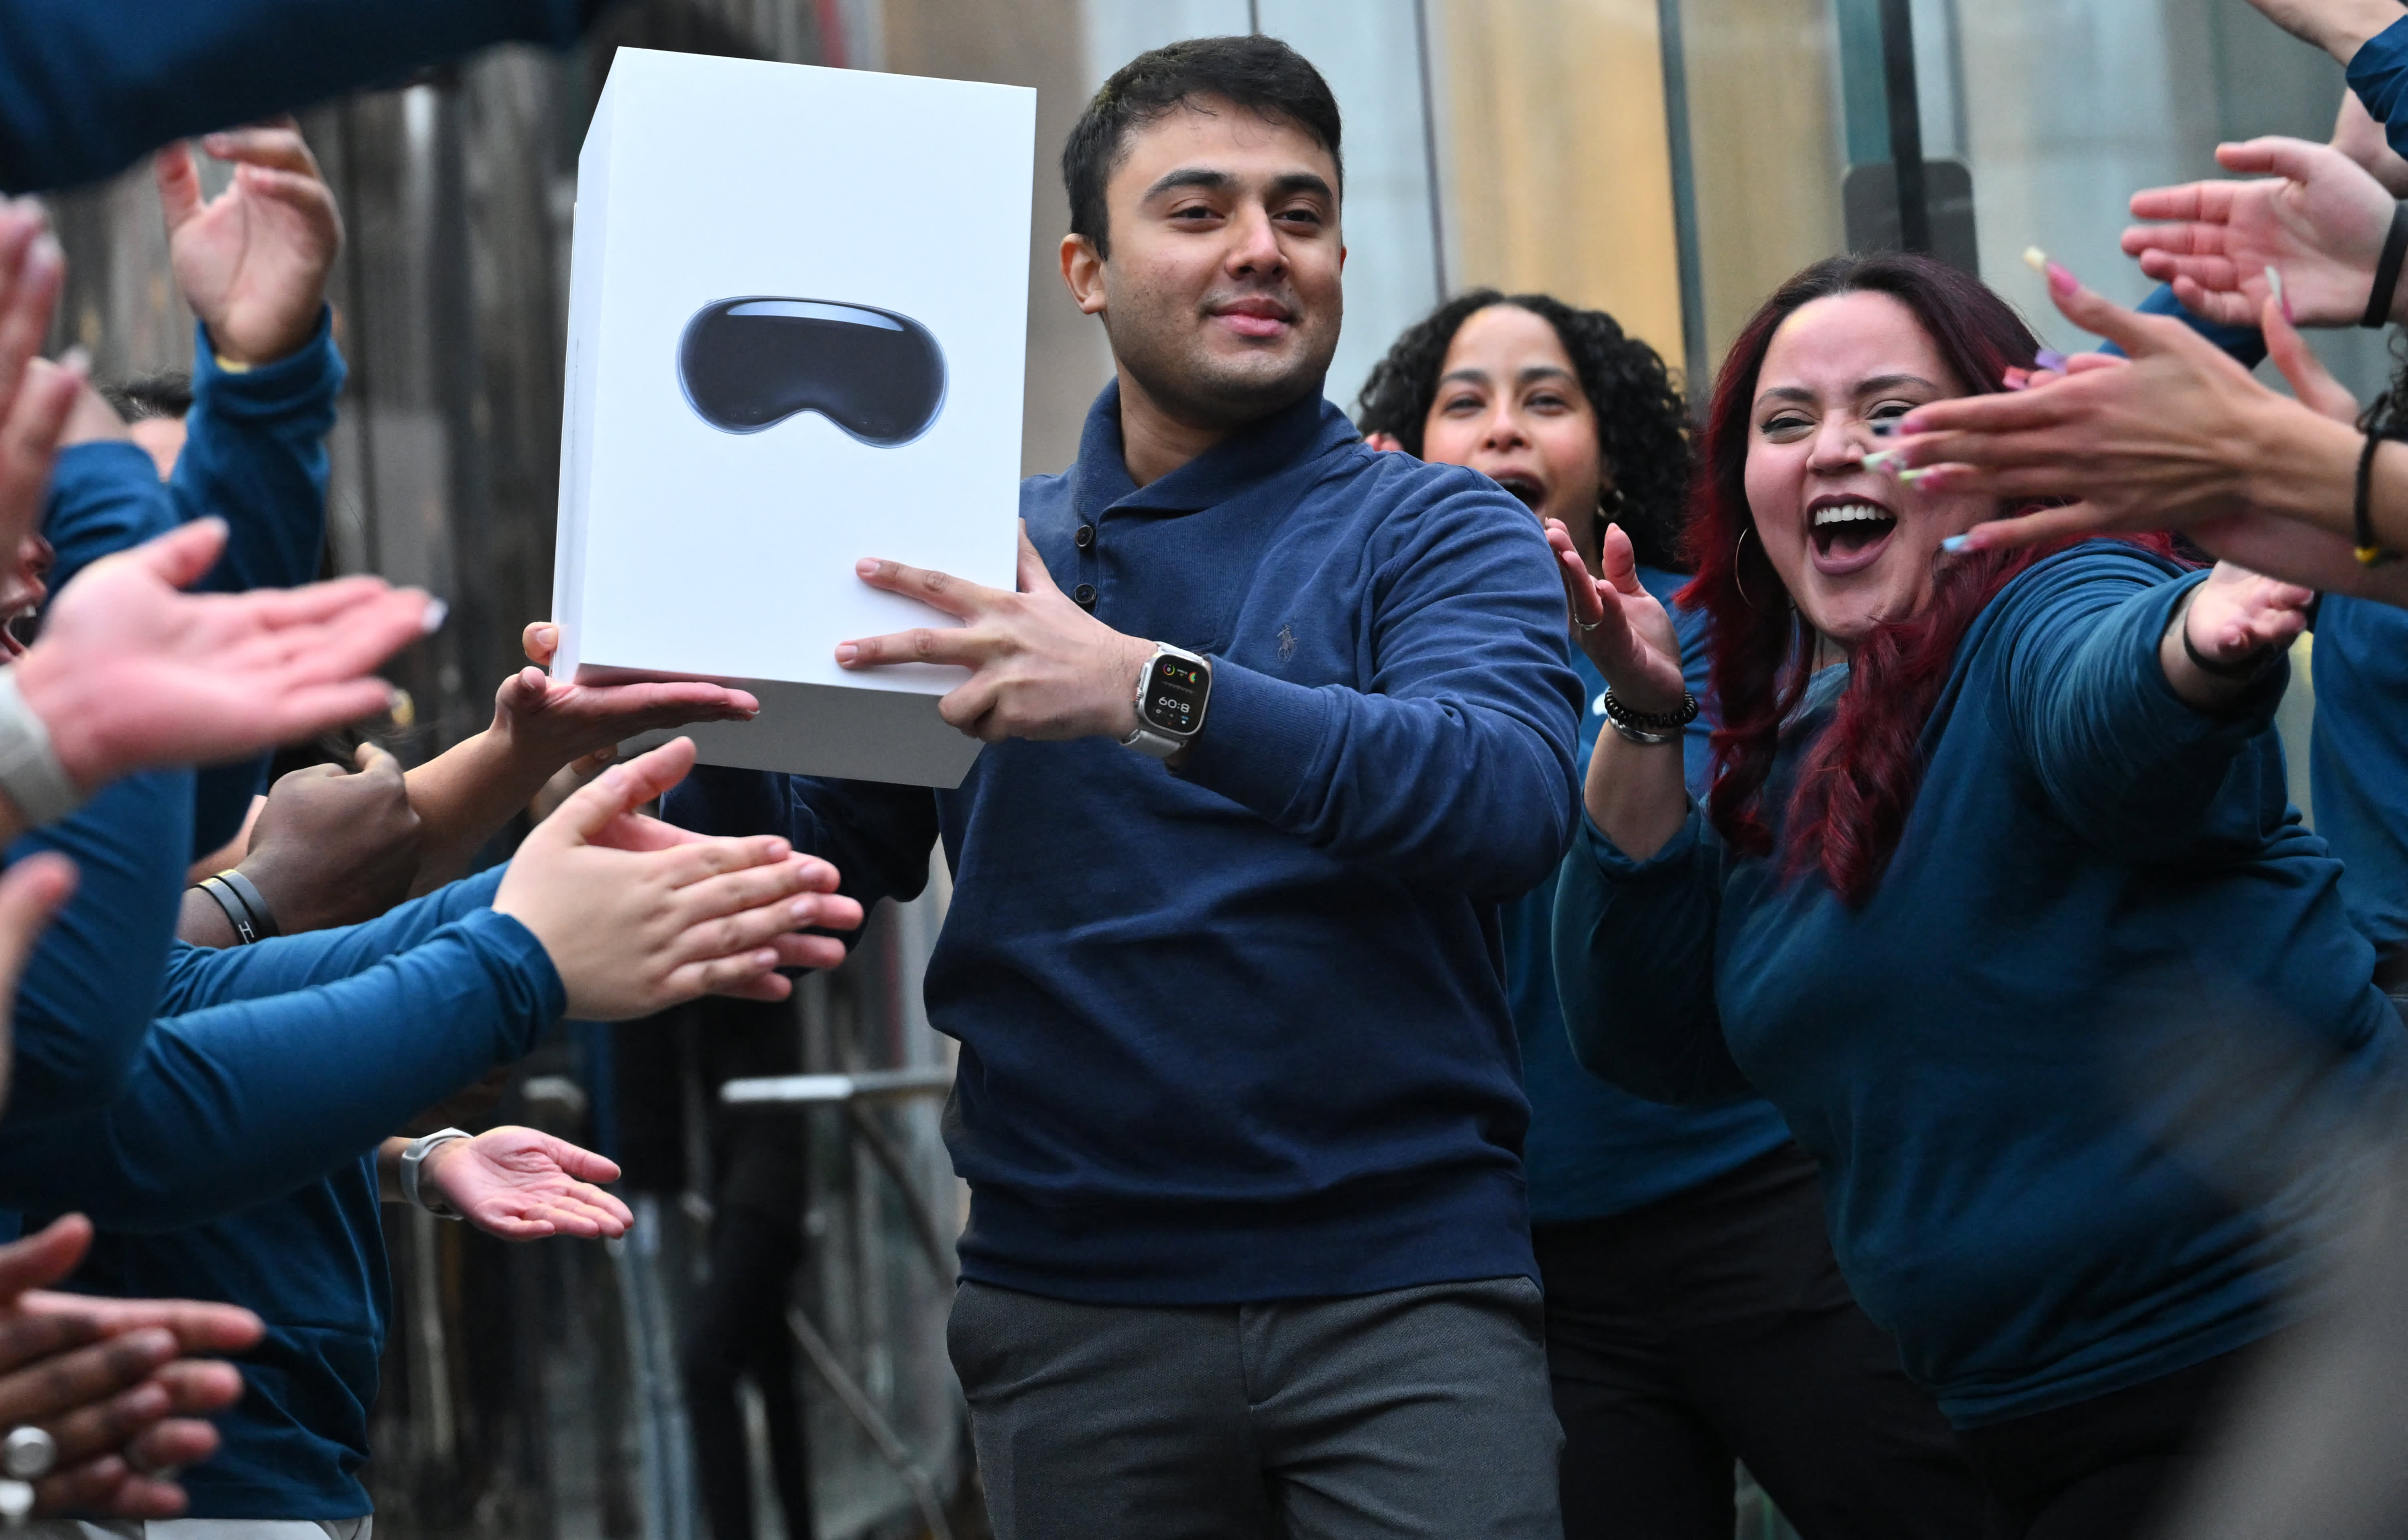 Apple's Vision Pro virtual reality headset launches in the United States